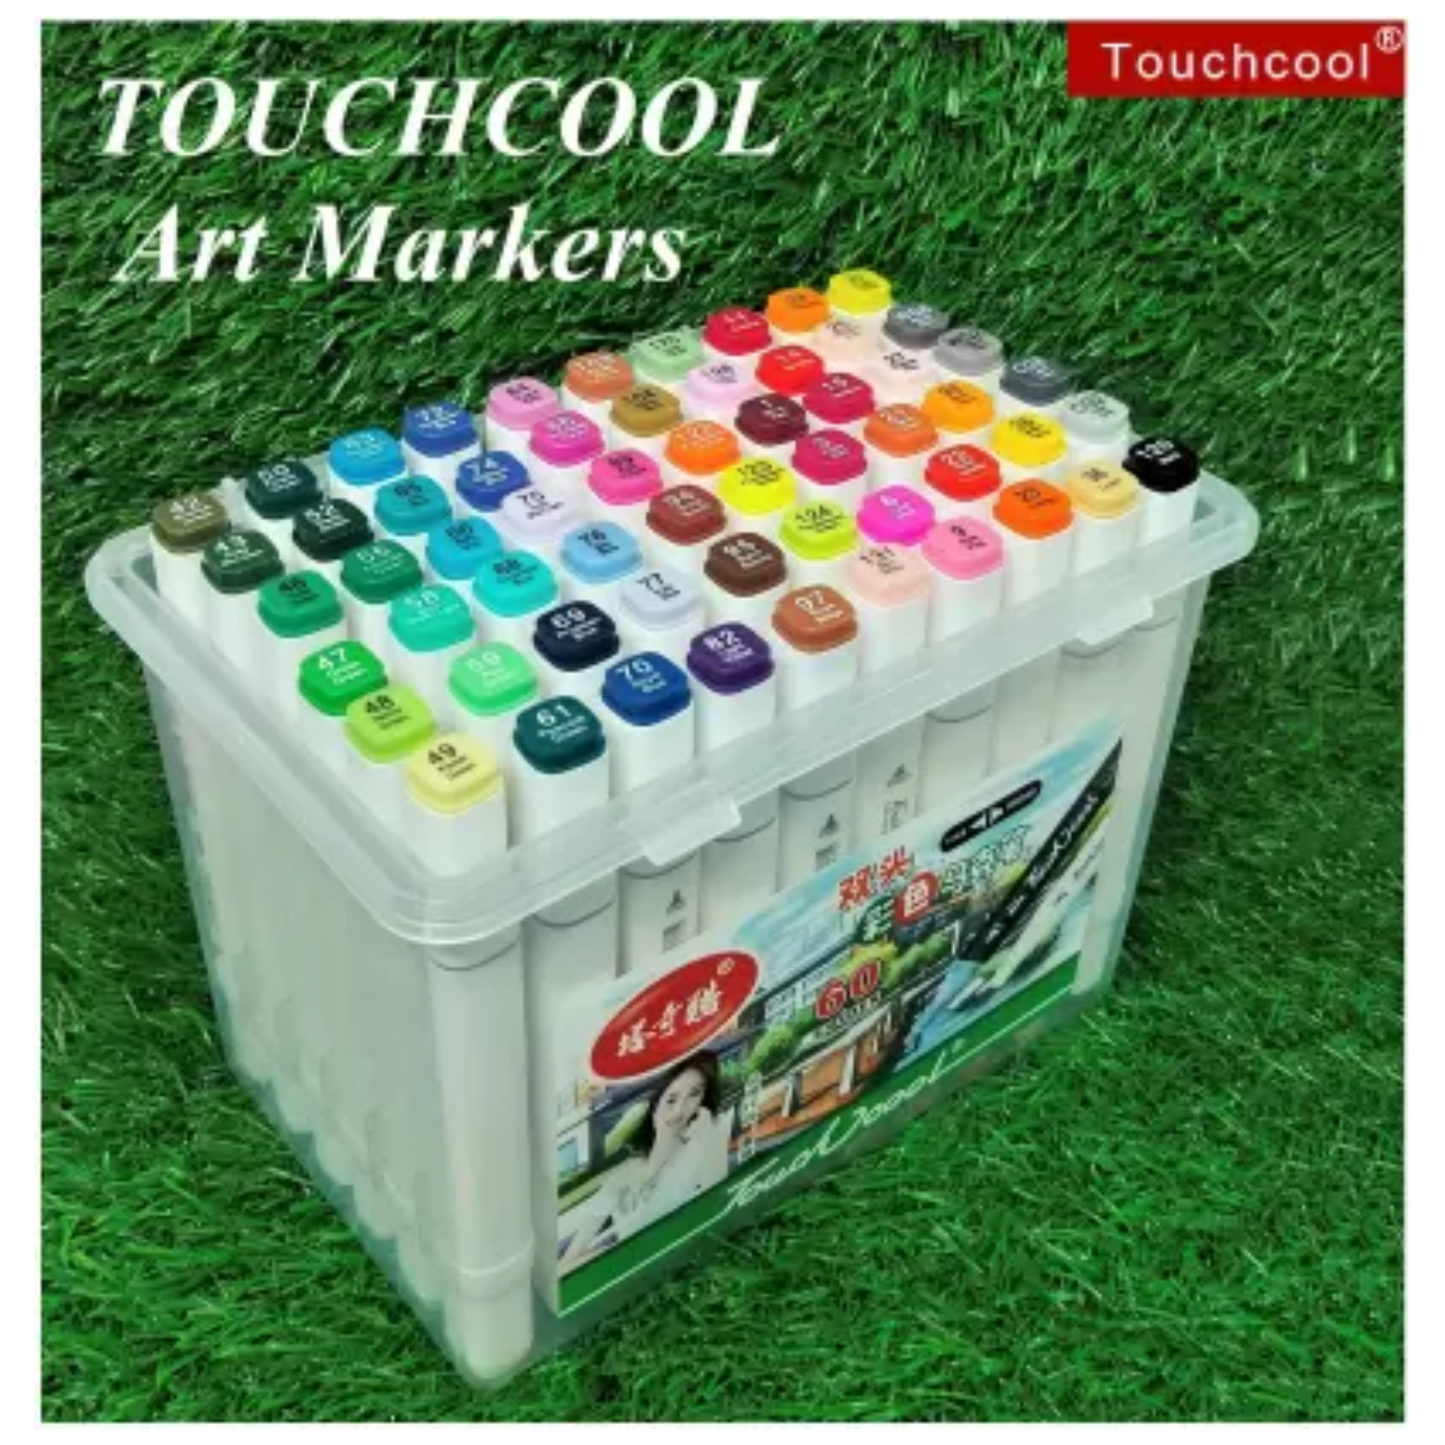 Touchcool W Alcohol Marker set of 60